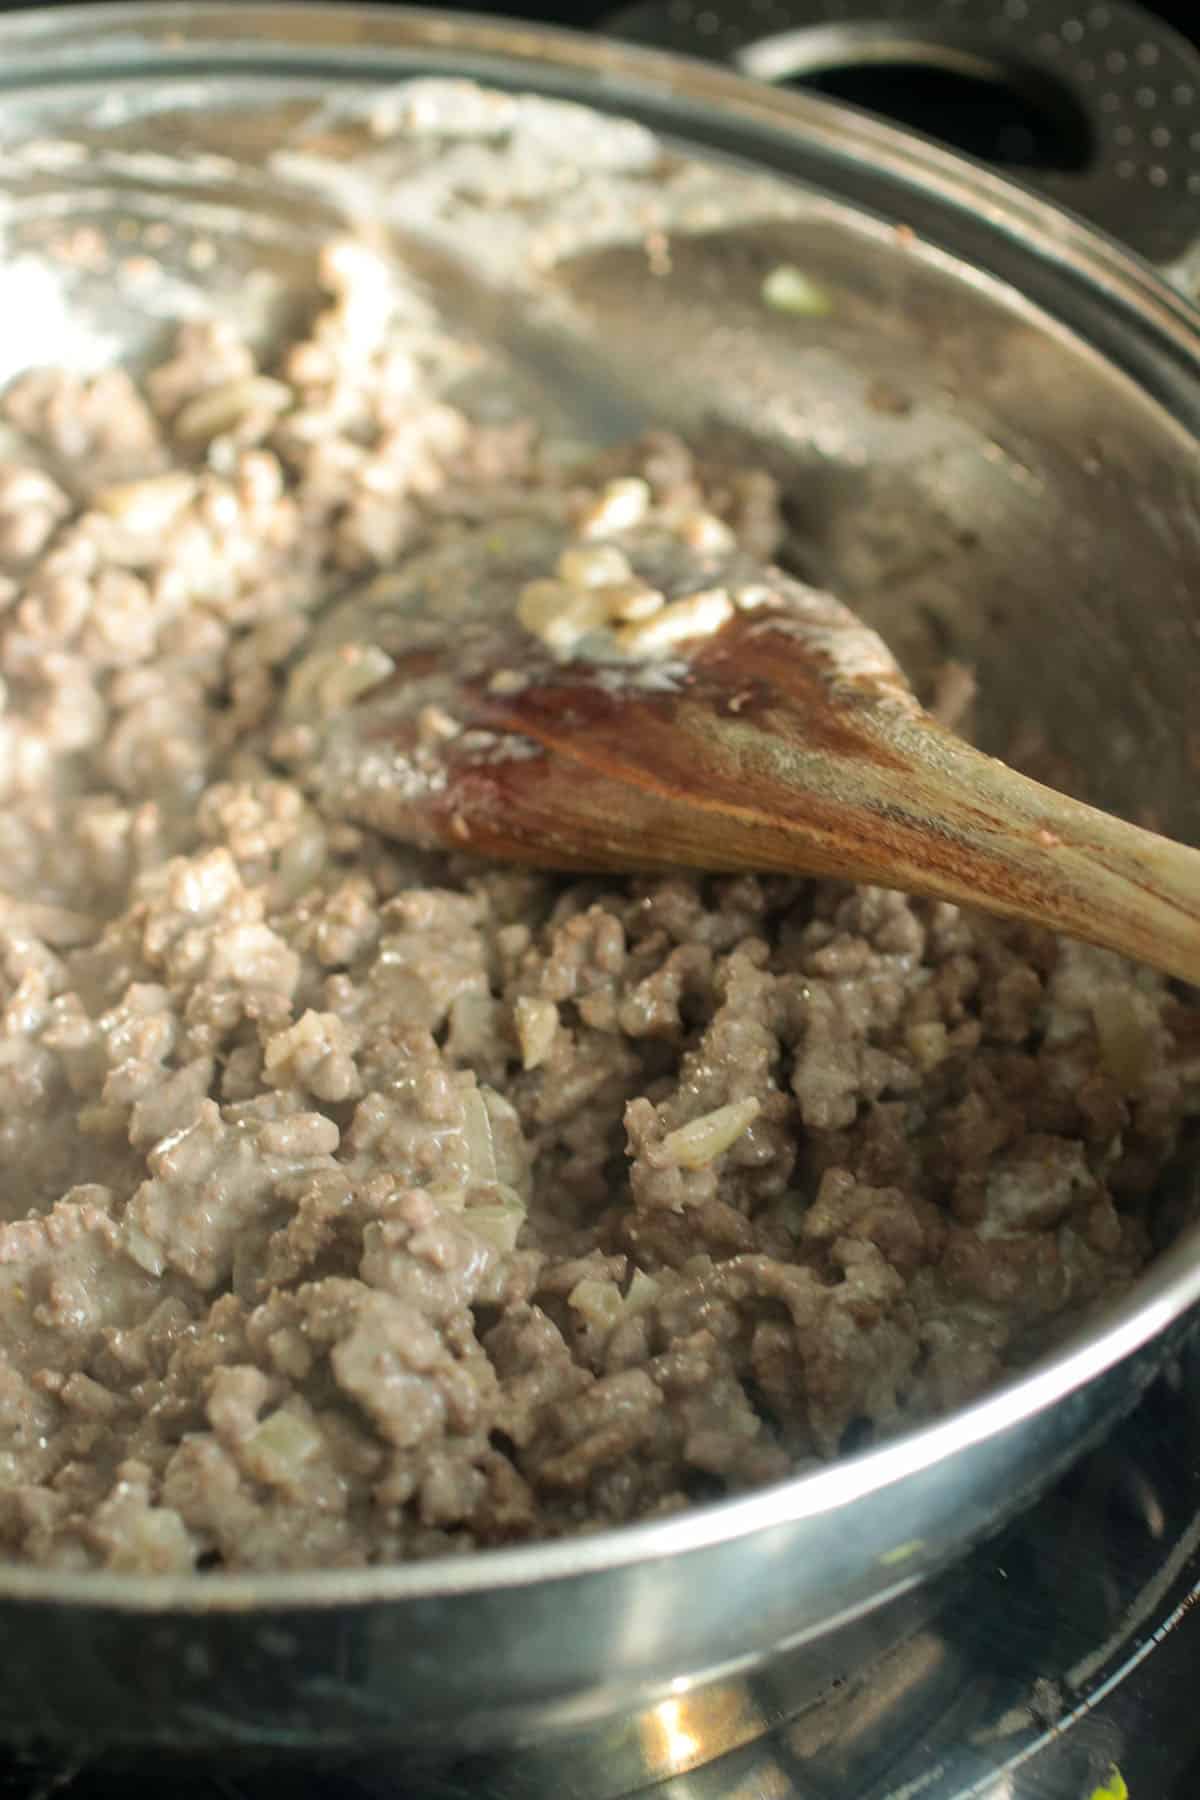 The cooked ground beef in the pan.